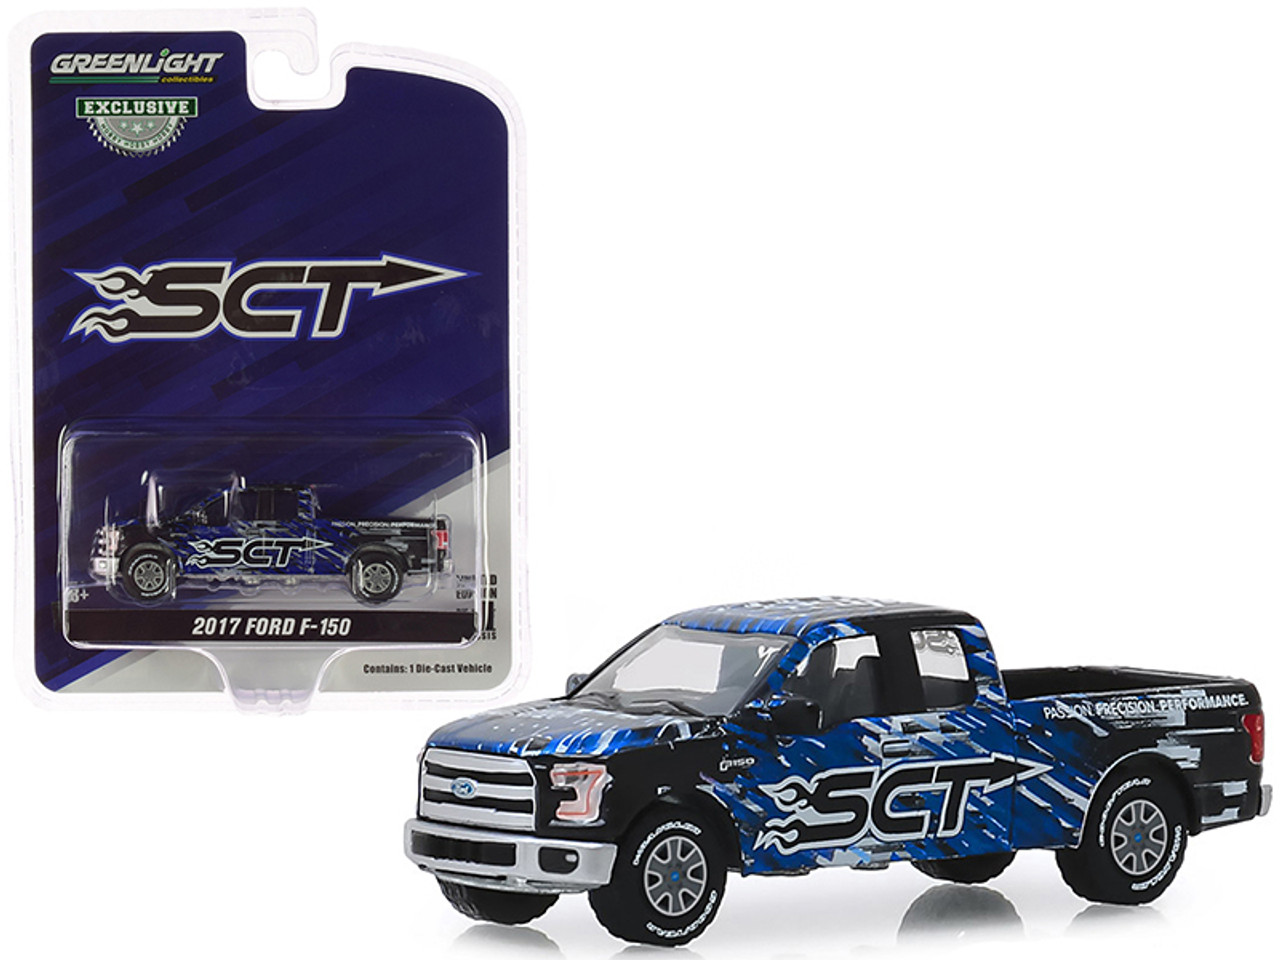 2017 Ford F-150 Pickup Truck "SCT Performance LLC" "Hobby Exclusive" 1/64 Diecast Model Car by Greenlight